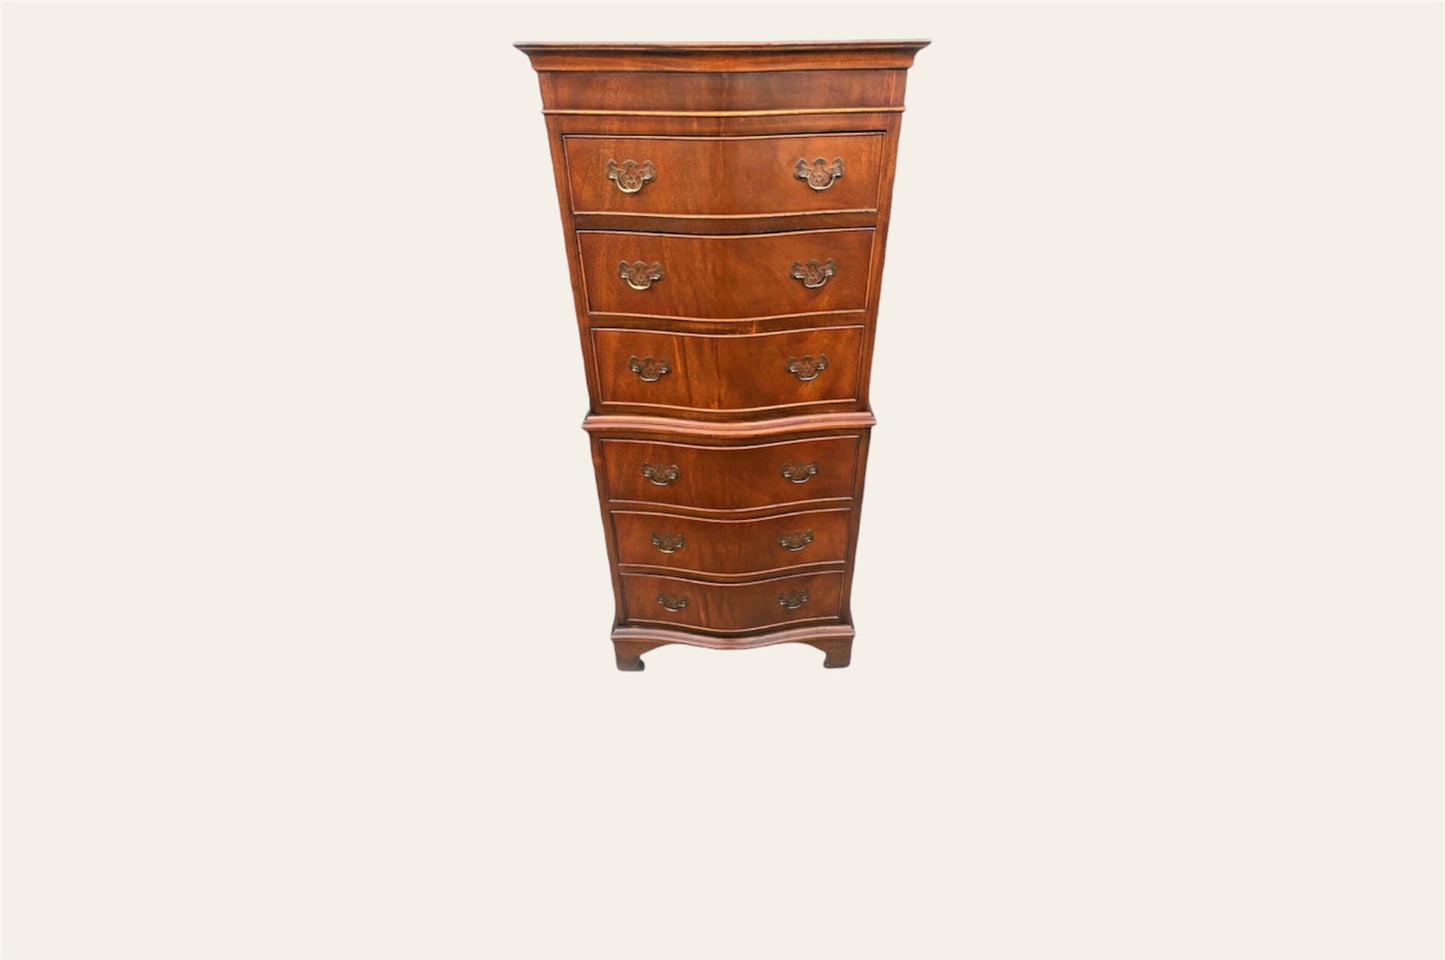 004.....Handsome Vintage Mahogany Tallboy Chest Of Drawers ( SOLD )